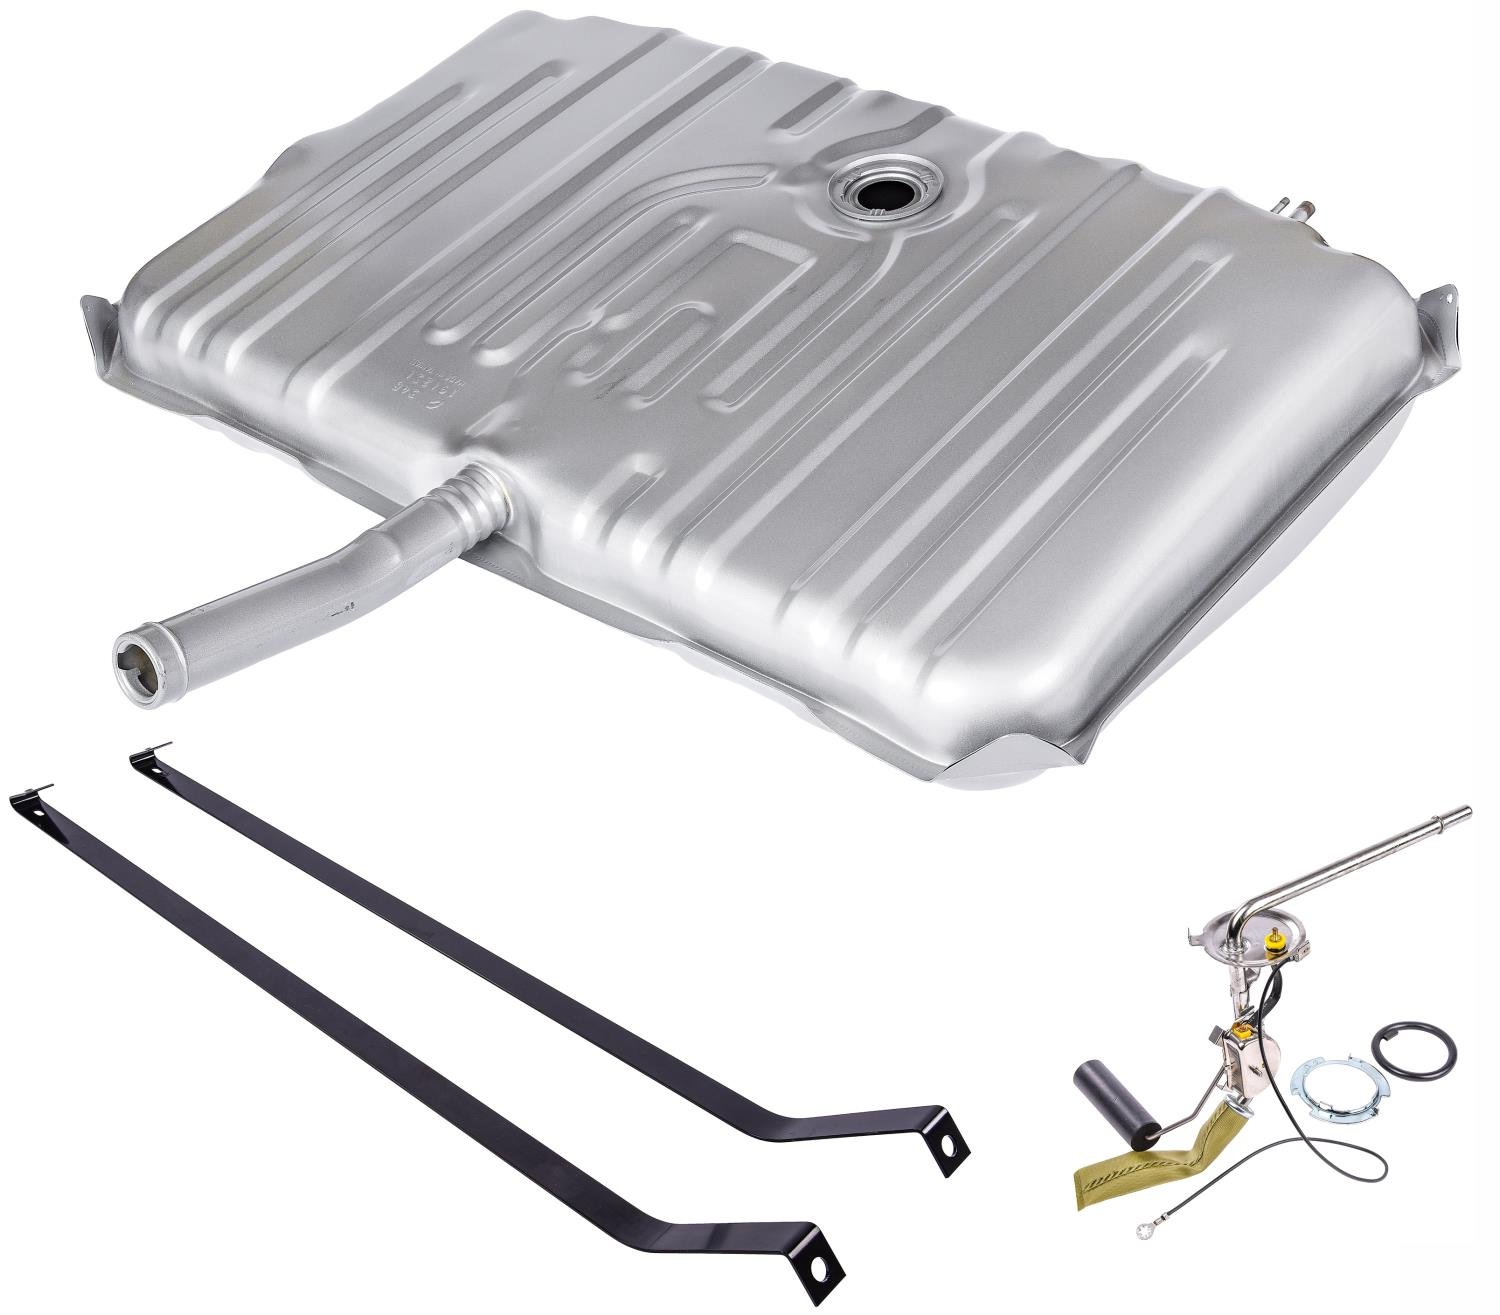 Fuel Tank Kit with Straps & Sending Unit for 1968-1969 GM A-Body Cars [20-Gallon]